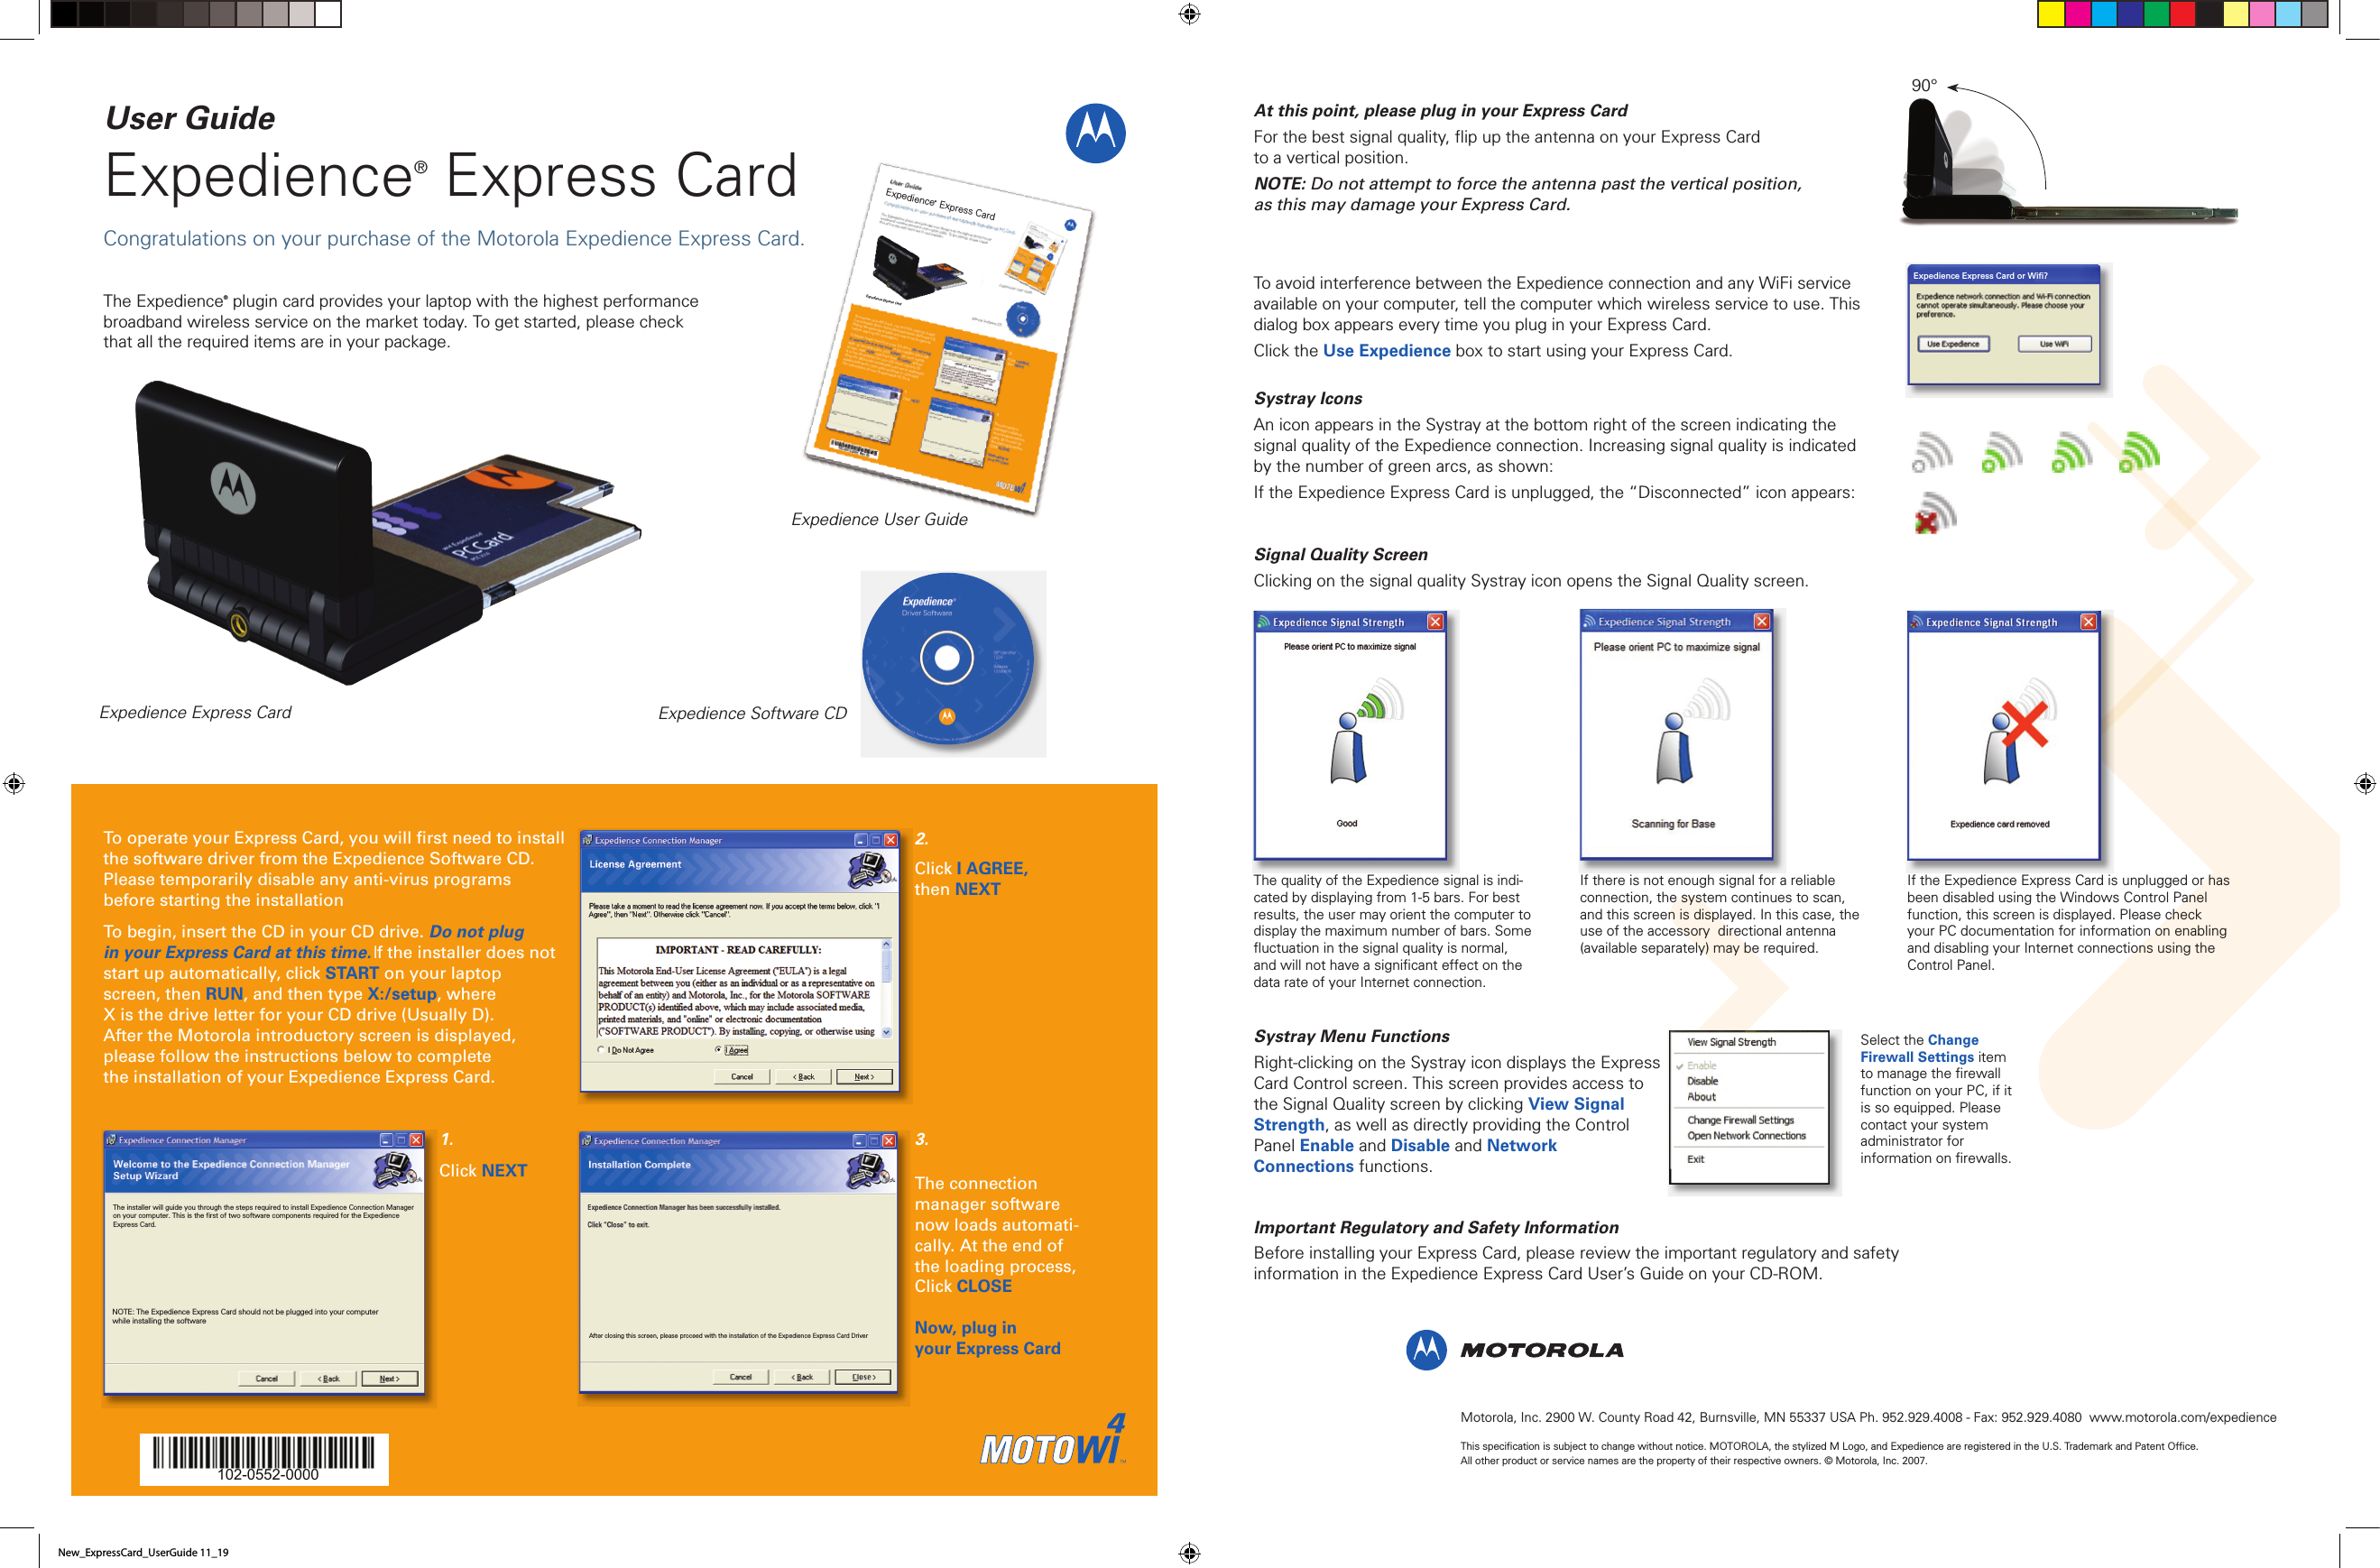 The Expedience® plugin card provides your laptop with the highest performance broadband wireless service on the market today. To get started, please check that all the required items are in your package.Expedience® Express Card User GuideExpedience Express Card Expedience Software CDExpedience User GuideTo operate your Express Card, you will ﬁrst need to install the software driver from the Expedience Software CD. Please temporarily disable any anti-virus programsbefore starting the installationTo begin, insert the CD in your CD drive. Do not plug in your Express Card at this time. If the installer does not start up automatically, click START on your laptop screen, then RUN, and then type X:/setup, where X is the drive letter for your CD drive (Usually D). After the Motorola introductory screen is displayed, please follow the instructions below to complete the installation of your Expedience Express Card. At this point, please plug in your Express CardFor the best signal quality, ﬂip up the antenna on your Express Card to a vertical position.NOTE: Do not attempt to force the antenna past the vertical position, as this may damage your Express Card.To avoid interference between the Expedience connection and any WiFi service available on your computer, tell the computer which wireless service to use. This dialog box appears every time you plug in your Express Card. Click the Use Expedience box to start using your Express Card.Systray IconsAn icon appears in the Systray at the bottom right of the screen indicating the signal quality of the Expedience connection. Increasing signal quality is indicated by the number of green arcs, as shown:If the Expedience Express Card is unplugged, the “Disconnected” icon appears:Signal Quality ScreenClicking on the signal quality Systray icon opens the Signal Quality screen.The quality of the Expedience signal is indi-cated by displaying from 1-5 bars. For best results, the user may orient the computer to display the maximum number of bars. Some ﬂuctuation in the signal quality is normal, and will not have a signiﬁcant effect on the data rate of your Internet connection.If there is not enough signal for a reliable connection, the system continues to scan, and this screen is displayed. In this case, the use of the accessory  directional antenna (available separately) may be required. If the Expedience Express Card is unplugged or has been disabled using the Windows Control Panel function, this screen is displayed. Please check your PC documentation for information on enabling and disabling your Internet connections using the Control Panel.Systray Menu FunctionsRight-clicking on the Systray icon displays the Express Card Control screen. This screen provides access to the Signal Quality screen by clicking View Signal Strength, as well as directly providing the Control Panel Enable and Disable and NetworkConnections functions.Select the ChangeFirewall Settings item to manage the ﬁrewall function on your PC, if it is so equipped. Please contact your system administrator for information on ﬁrewalls.Click NEXT1.Click I AGREE, then NEXT2.The connection manager software now loads automati-cally. At the end of the loading process, Click CLOSENow, plug in your Express Card3.Congratulations on your purchase of the Motorola Expedience Express Card. Motorola, Inc. 2900 W. County Road 42, Burnsville, MN 55337 USA Ph. 952.929.4008 - Fax: 952.929.4080  www.motorola.com/expedienceThis speciﬁcation is subject to change without notice. MOTOROLA, the stylized M Logo, and Expedience are registered in the U.S. Trademark and Patent Ofﬁce. All other product or service names are the property of their respective owners. © Motorola, Inc. 2007.Important Regulatory and Safety InformationBefore installing your Express Card, please review the important regulatory and safety information in the Expedience Express Card User’s Guide on your CD-ROM.90°New_ExpressCard_UserGuide 11_19102-0552-0000NOTE: The Expedience Express Card should not be plugged into your computerwhile installing the softwareThe installer will guide you through the steps required to install Expedience Connection Manageron your computer. This is the first of two software components required for the ExpedienceExpress Card. After closing this screen, please proceed with the installation of the Expedience Express Card DriverExpedience Express CardExpedience  Express Card ®Expedience Express Card or Wifi?